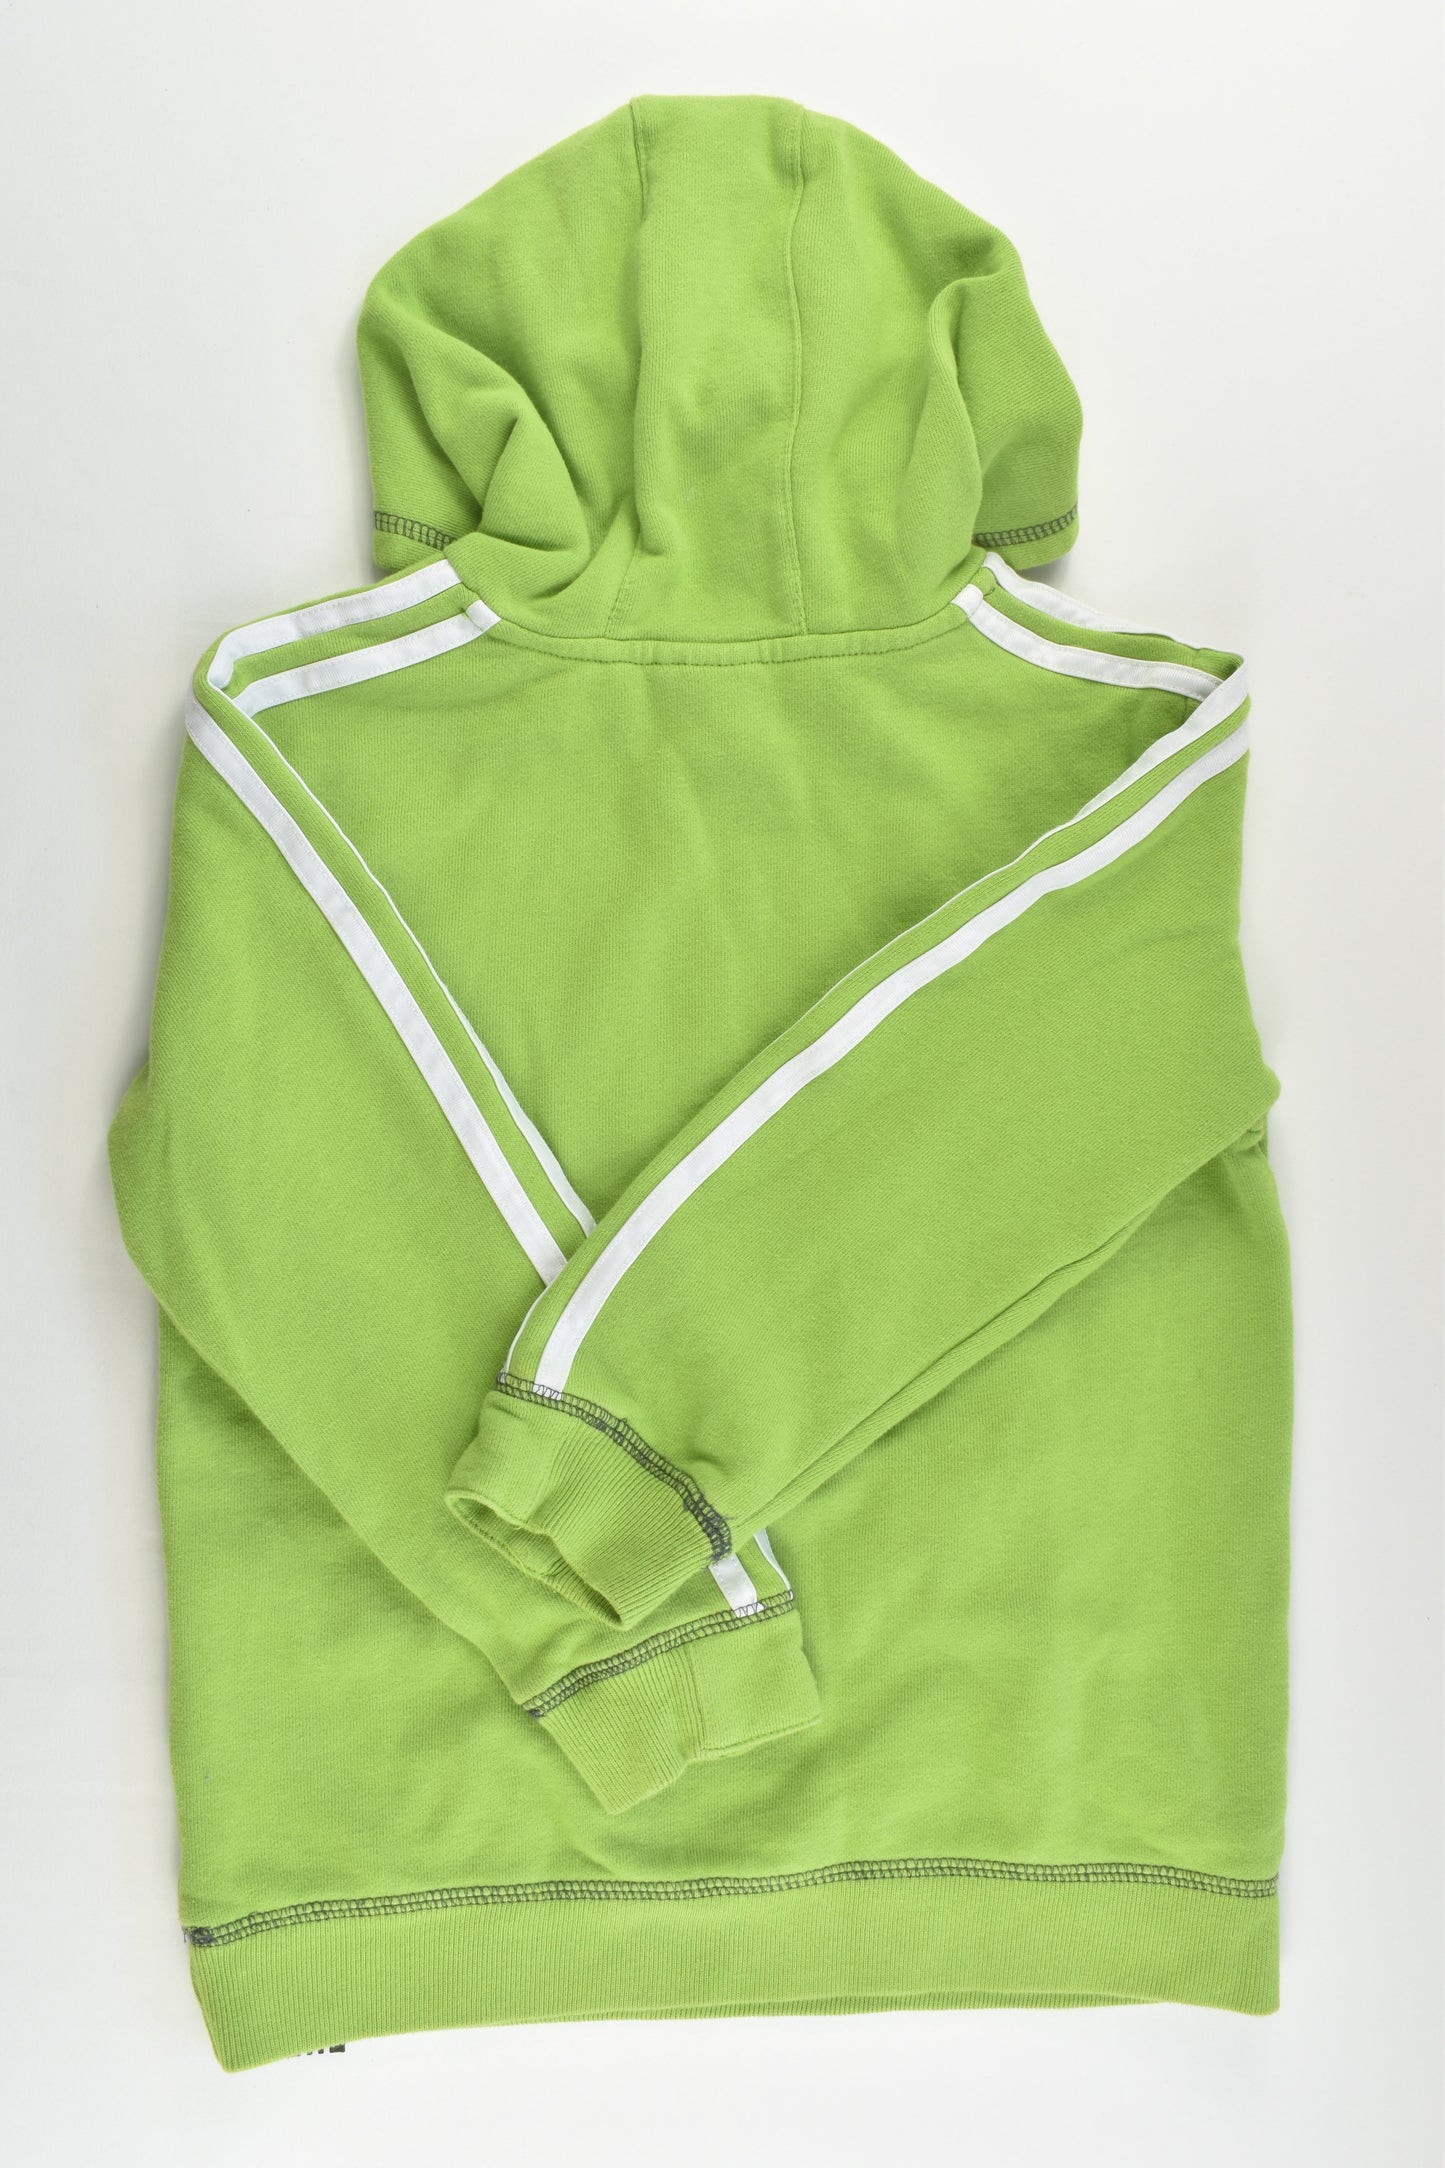 Adidas Size 7 Hooded Jumper